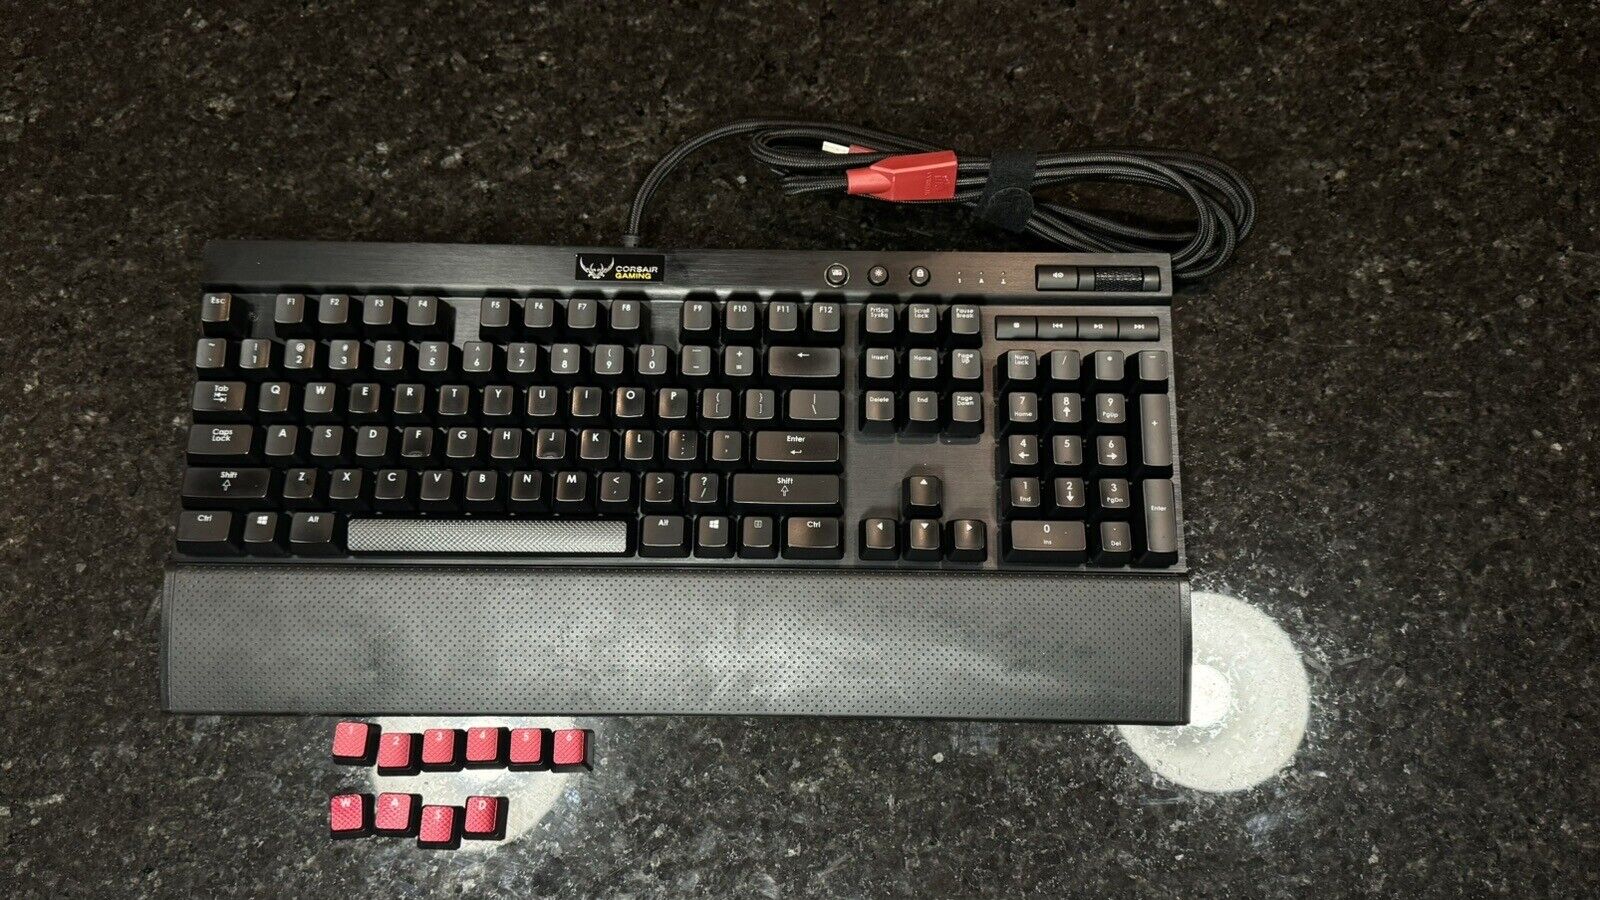 Corsair K70 LUX Mechanical Gaming Keyboard Cherry MX Red USB Wired Performance